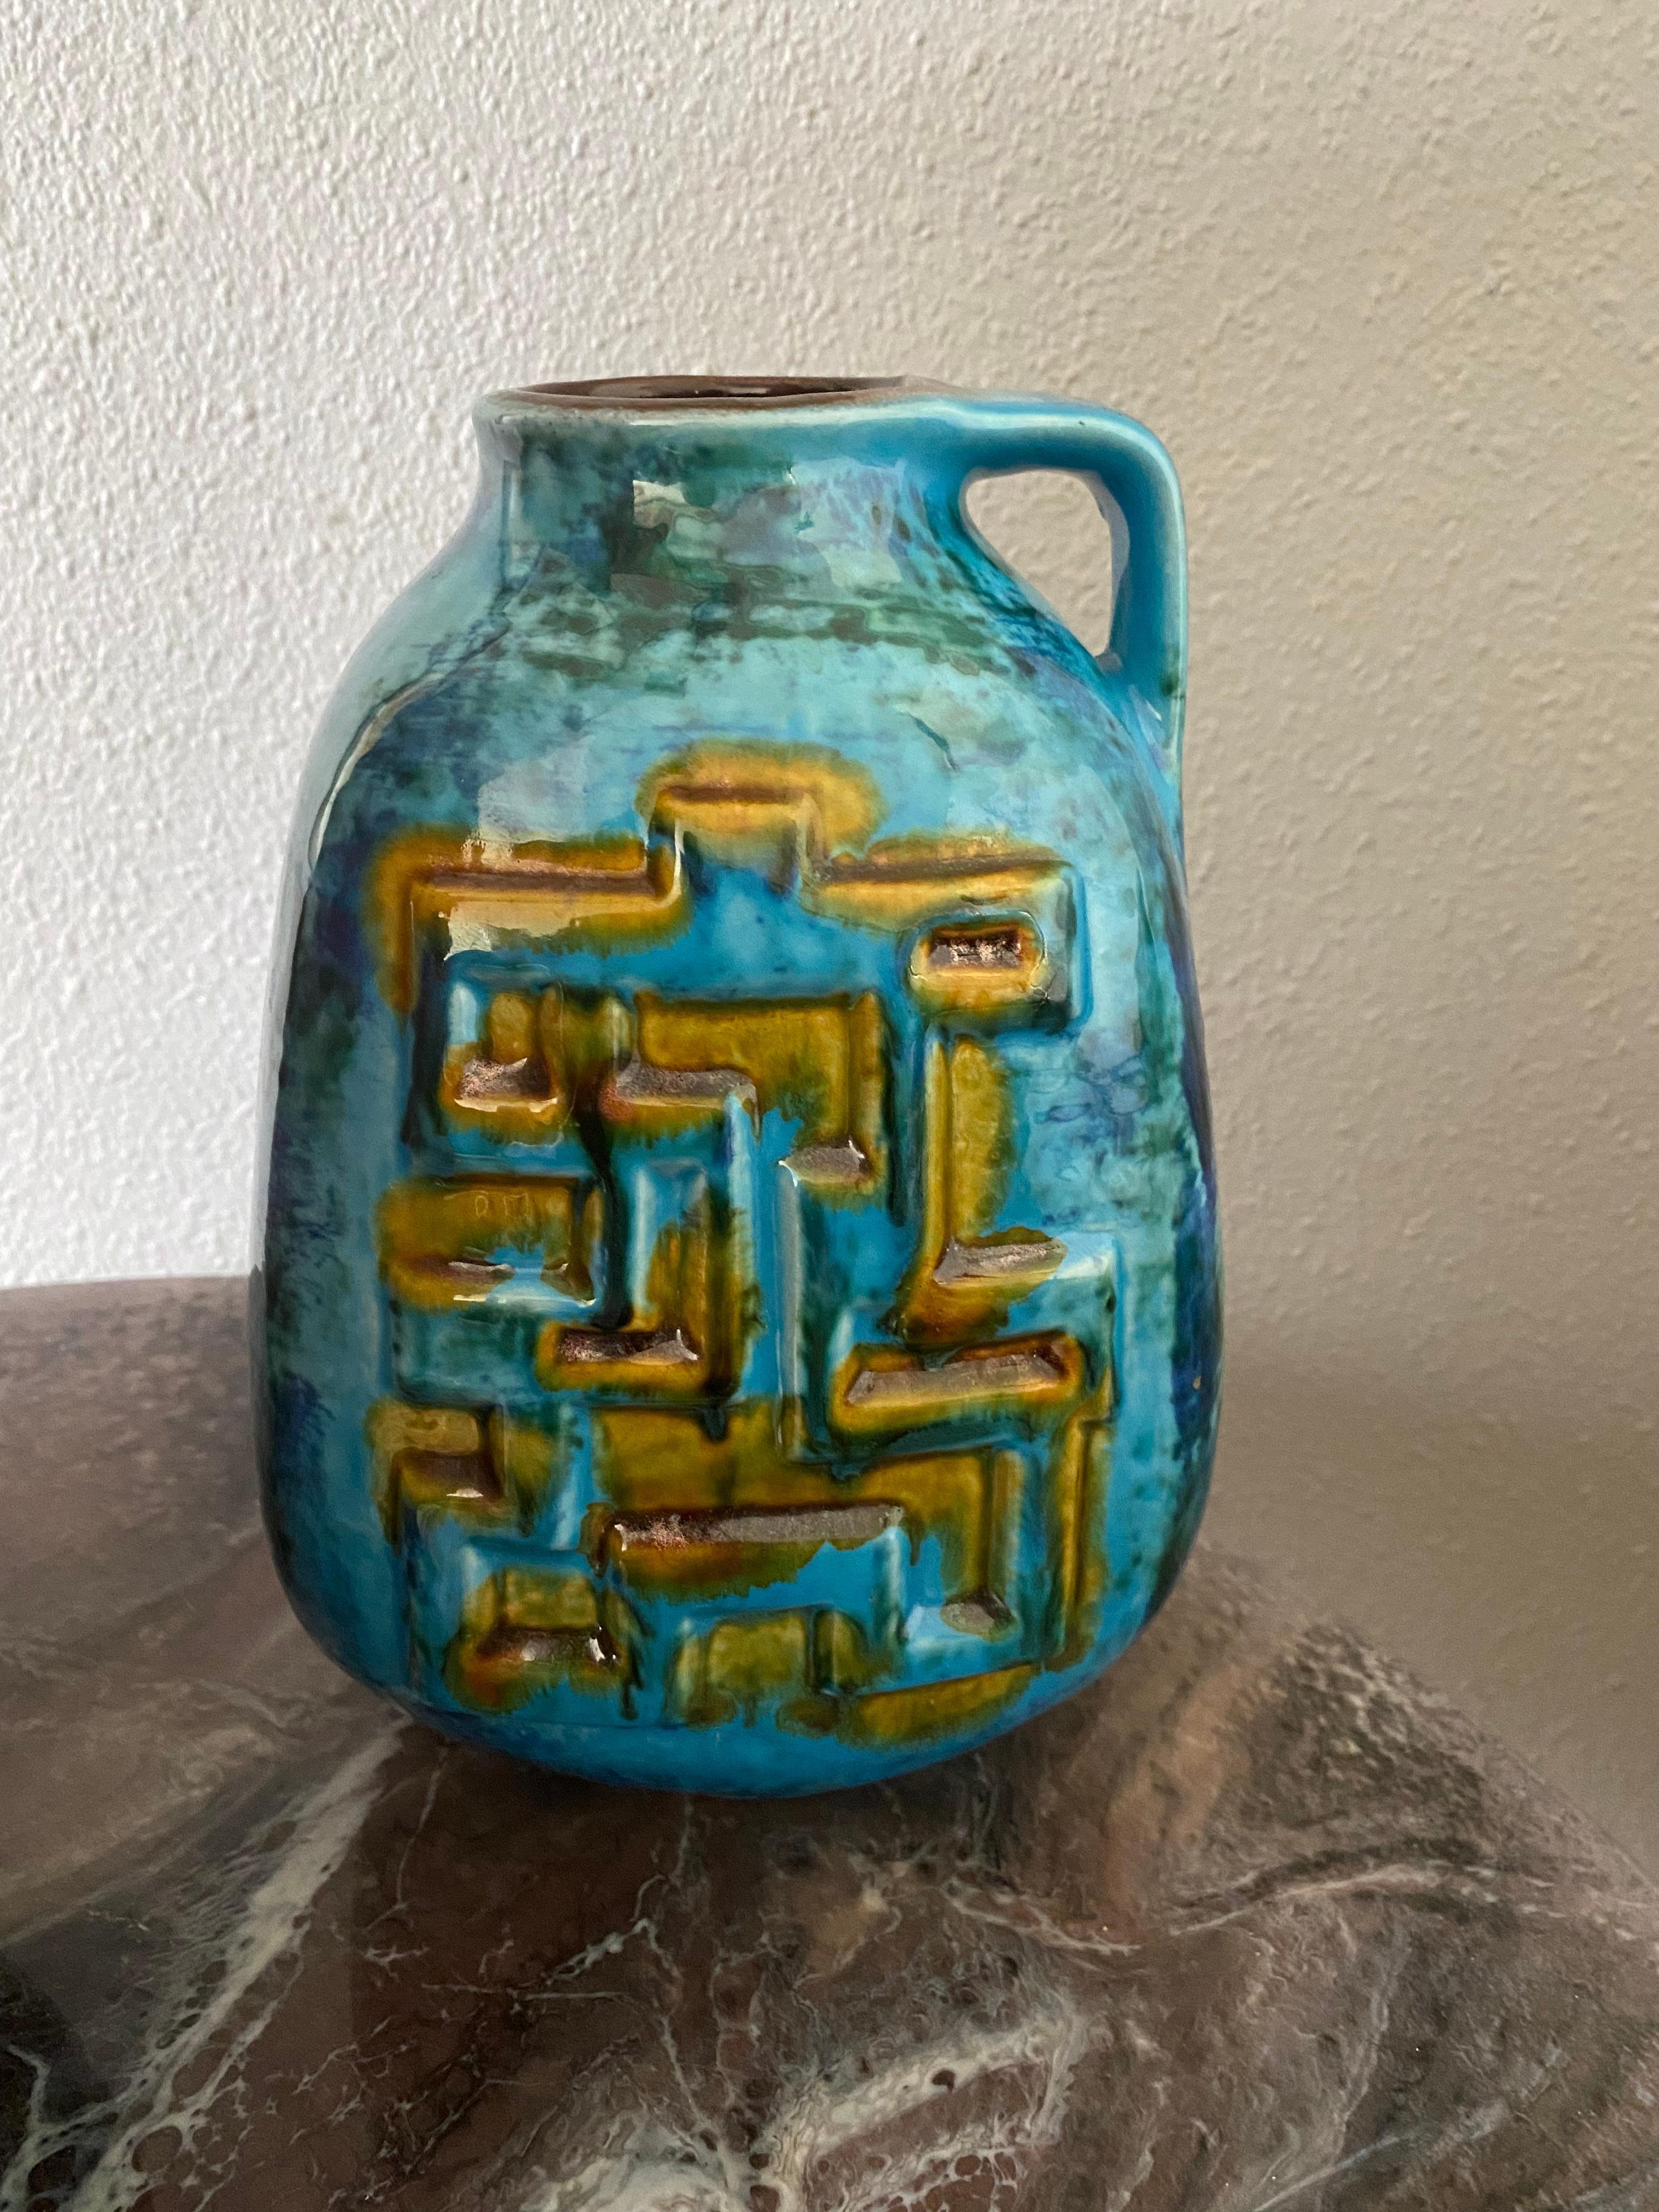 Beautiful vibrant blue with yellow/ochre ceramic vase from the quality items maker Carstens Keramik.